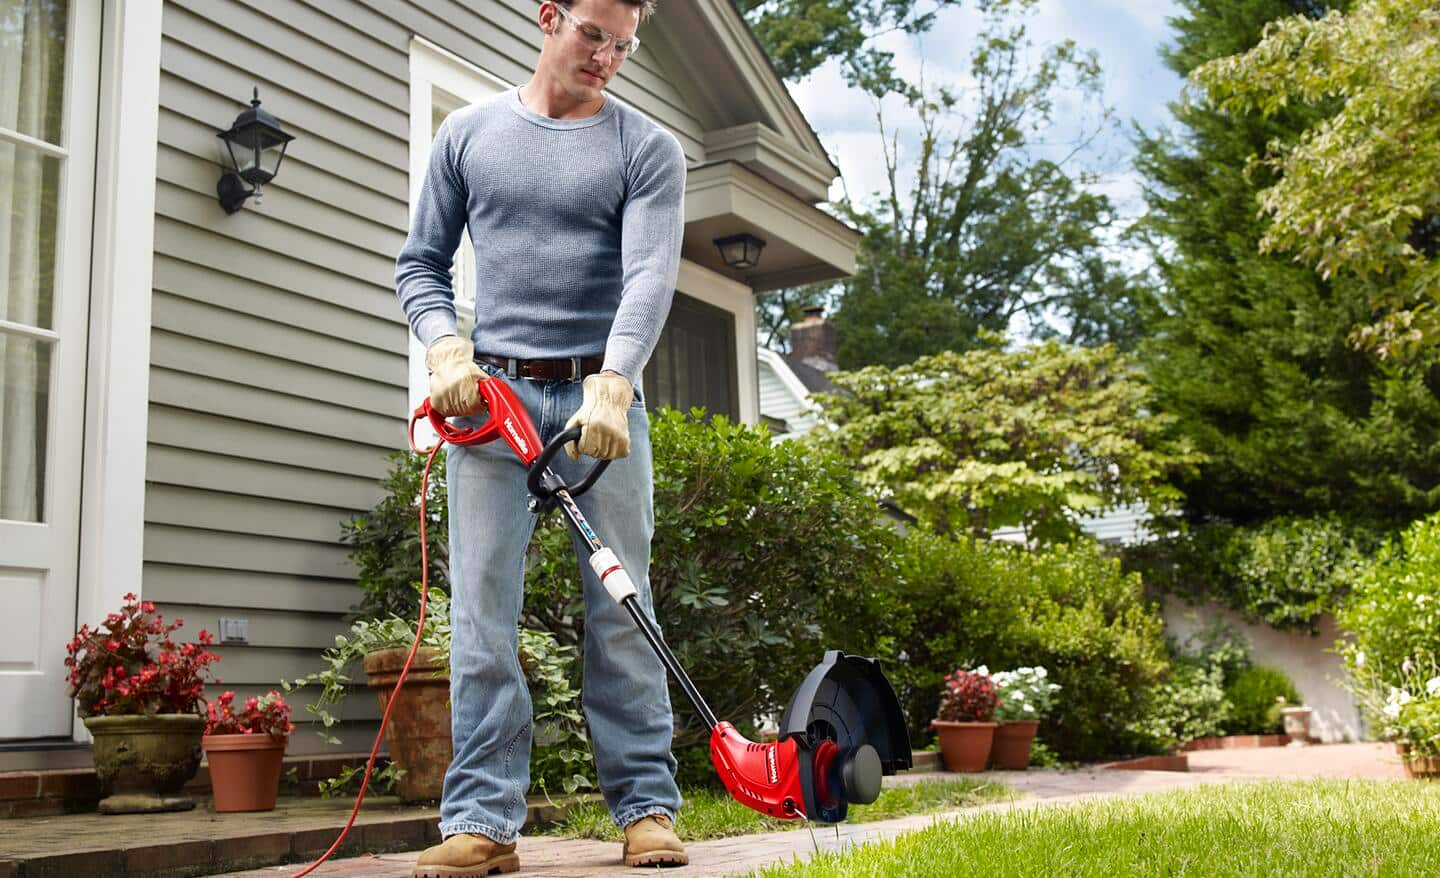 A person uses a gas string trimmer to edge flower beds.